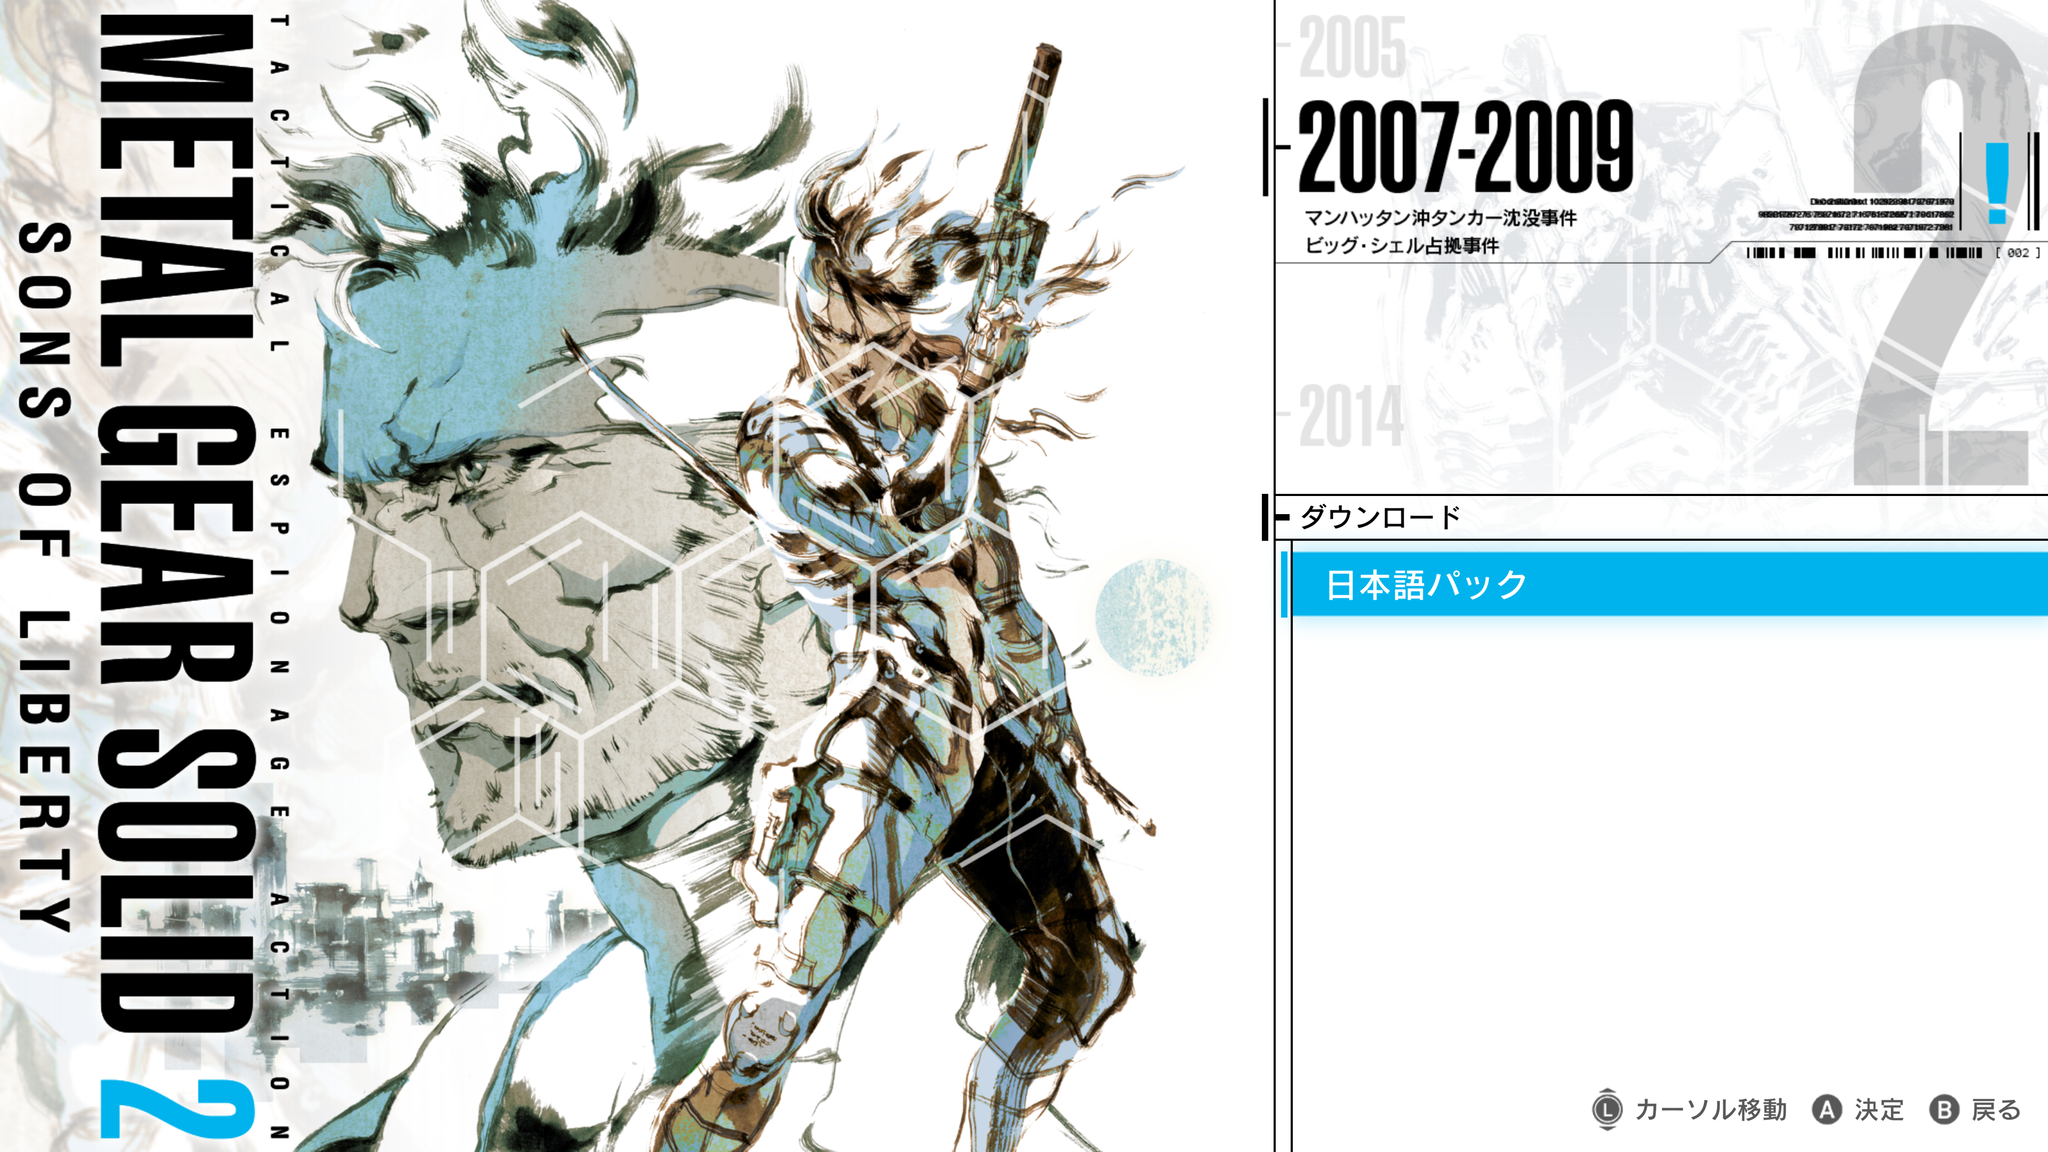 Re: [閒聊] METAL GEAR SOLID: MASTER COLLECTION